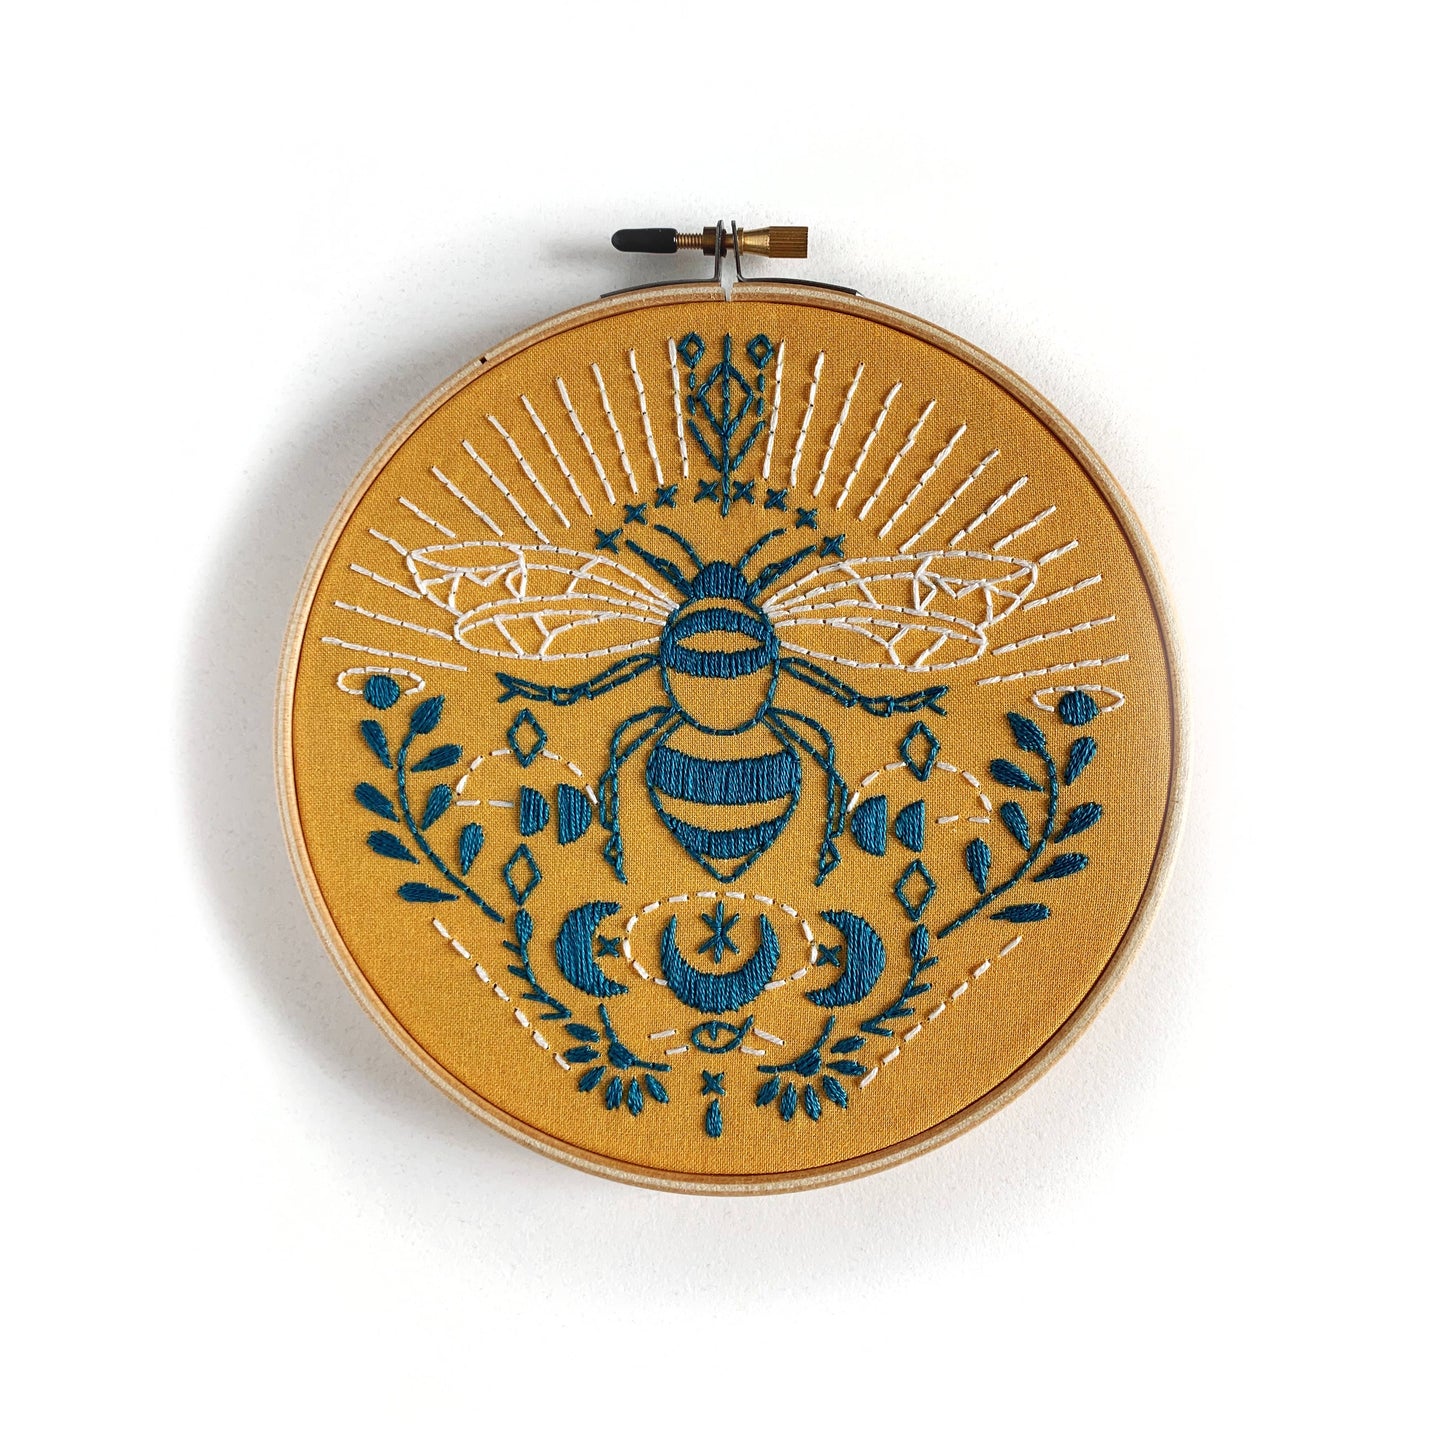 Bee Embroidery Kit